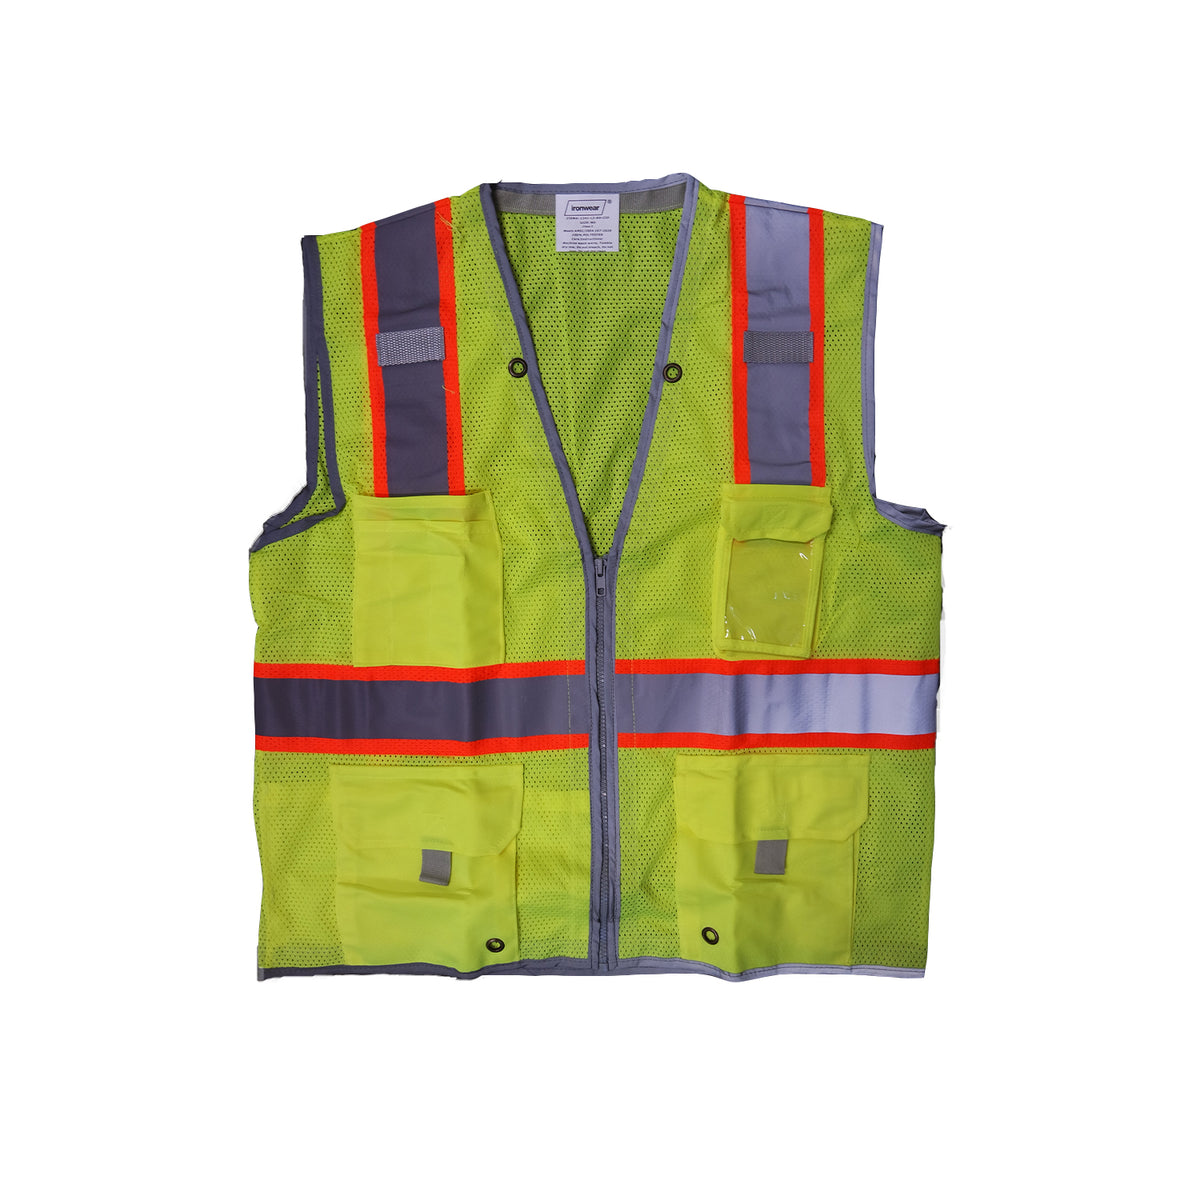 Ironwear Vest Lime 1241, ANSI Class 2, - Lime Mesh, 6 pockets -Safety- eGPS Solutions Inc.